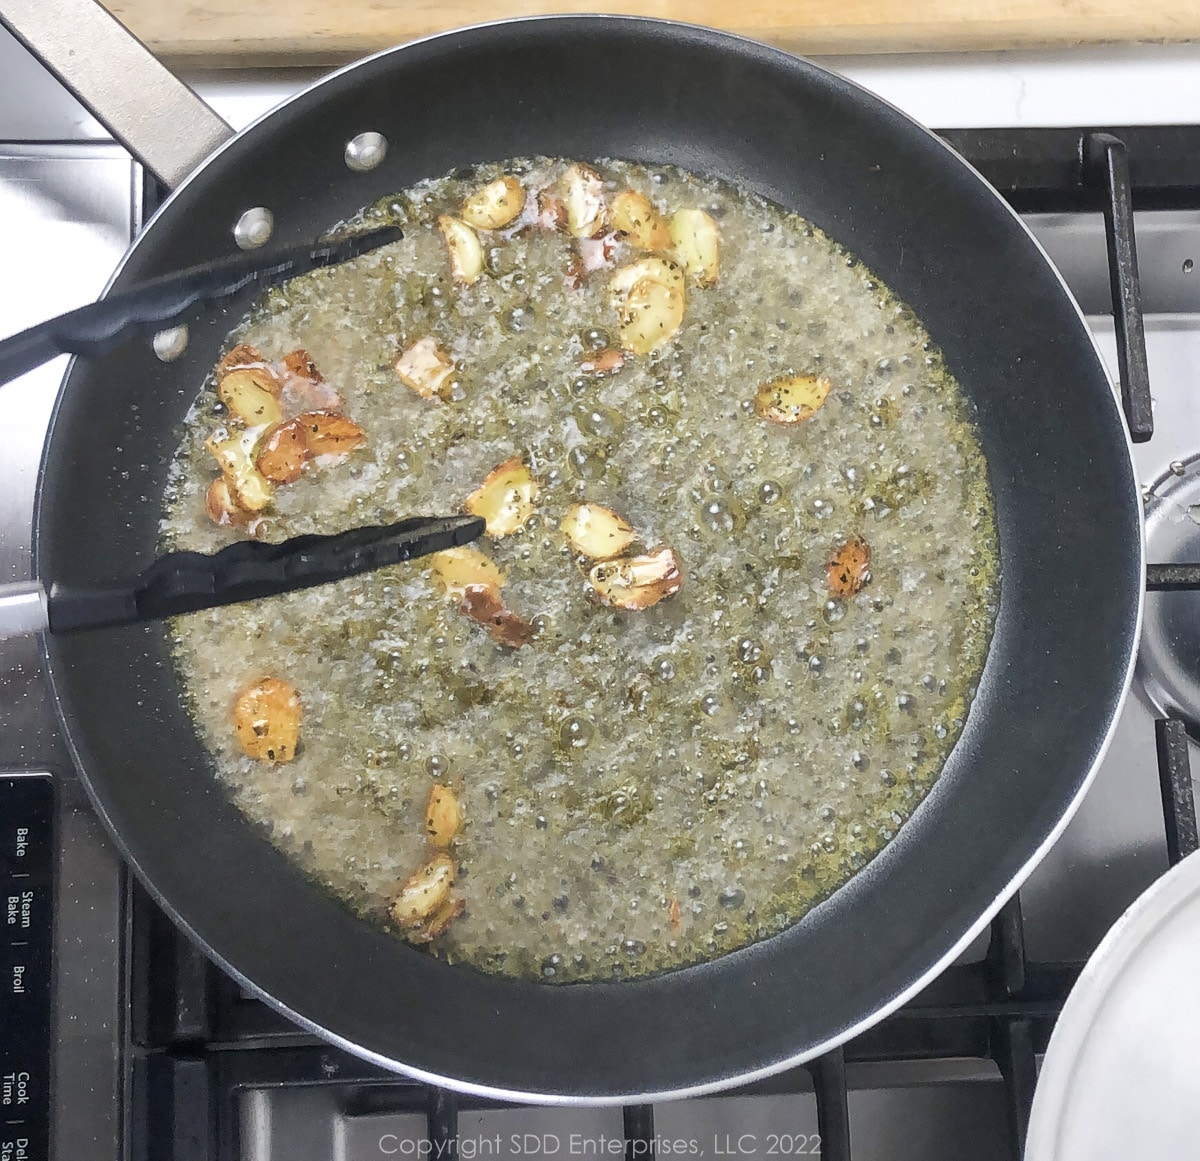 whine added to butter and garlic in a sauté pan